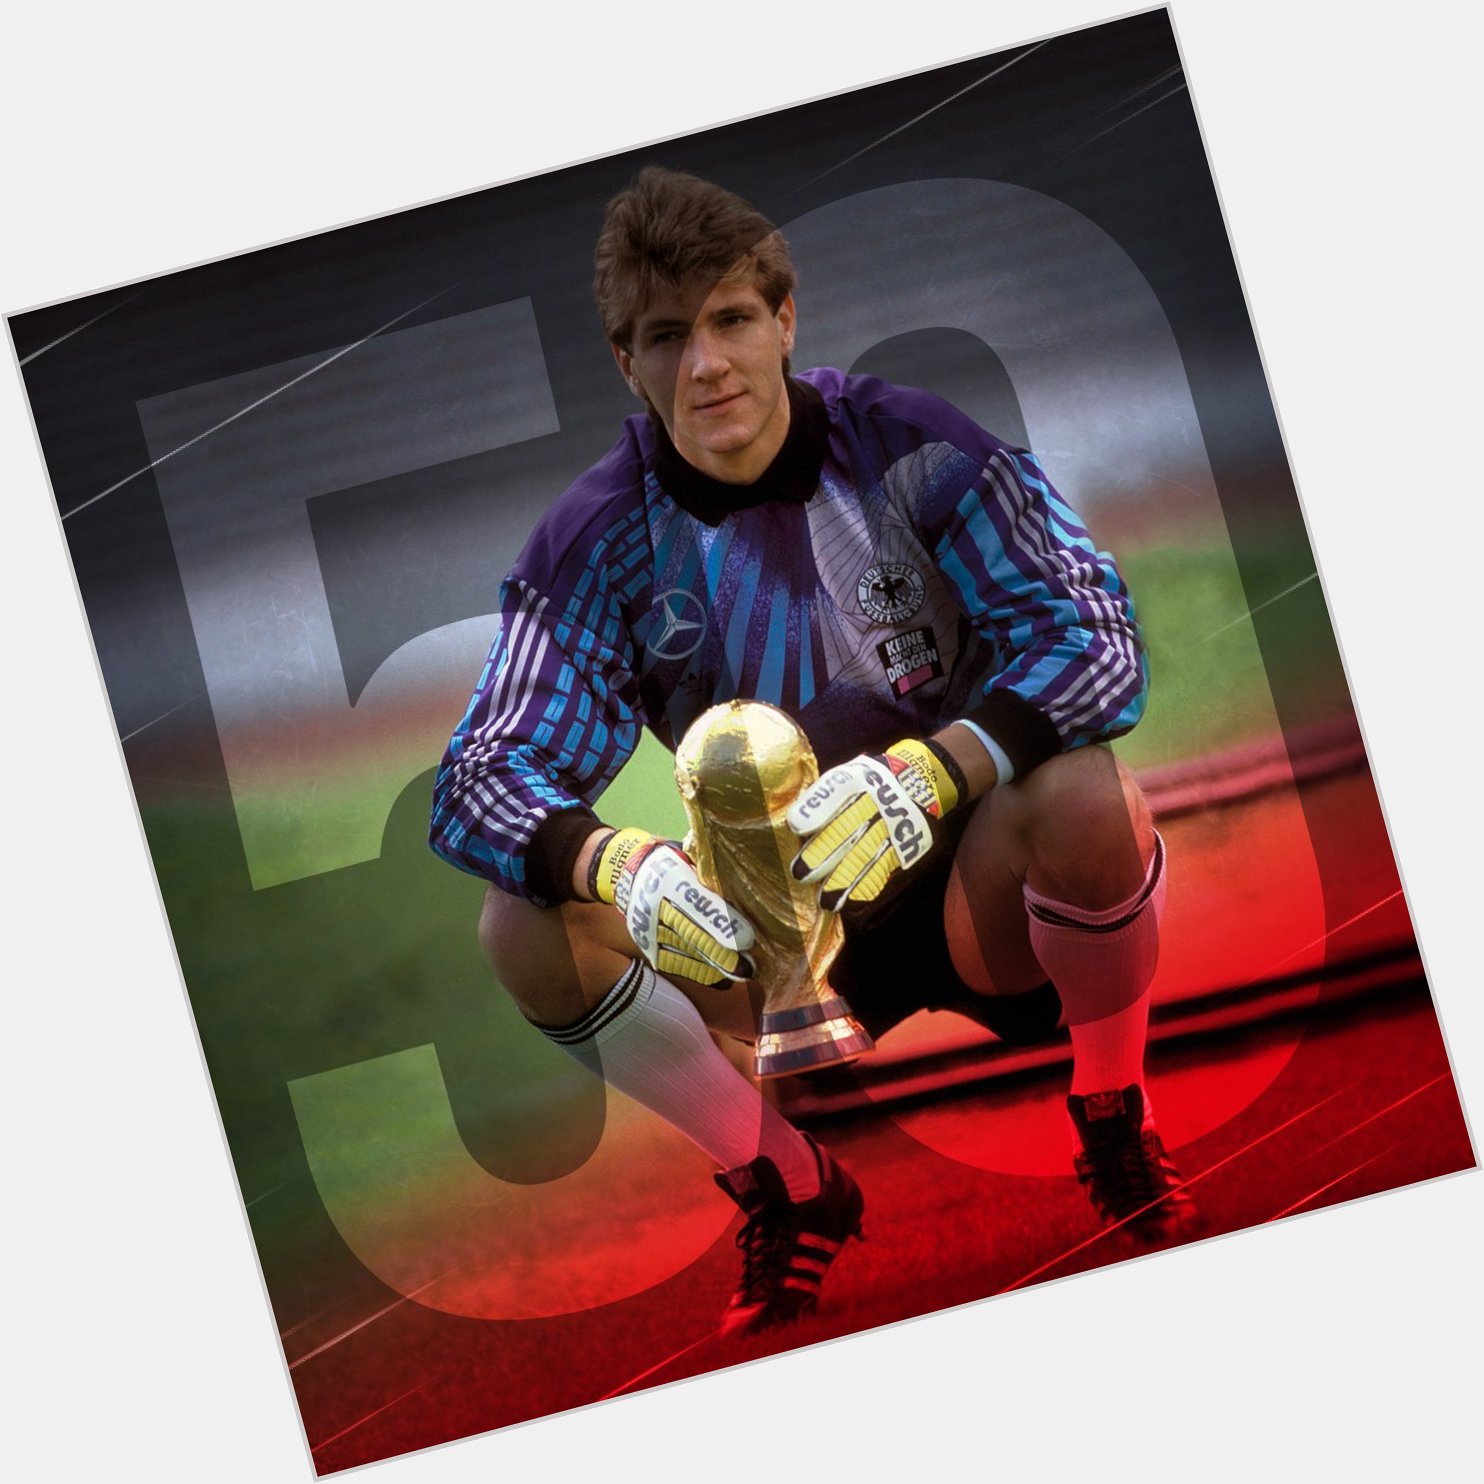   World Cup champion and former GK turns 50 today. Happy Birthday, Bodo! 